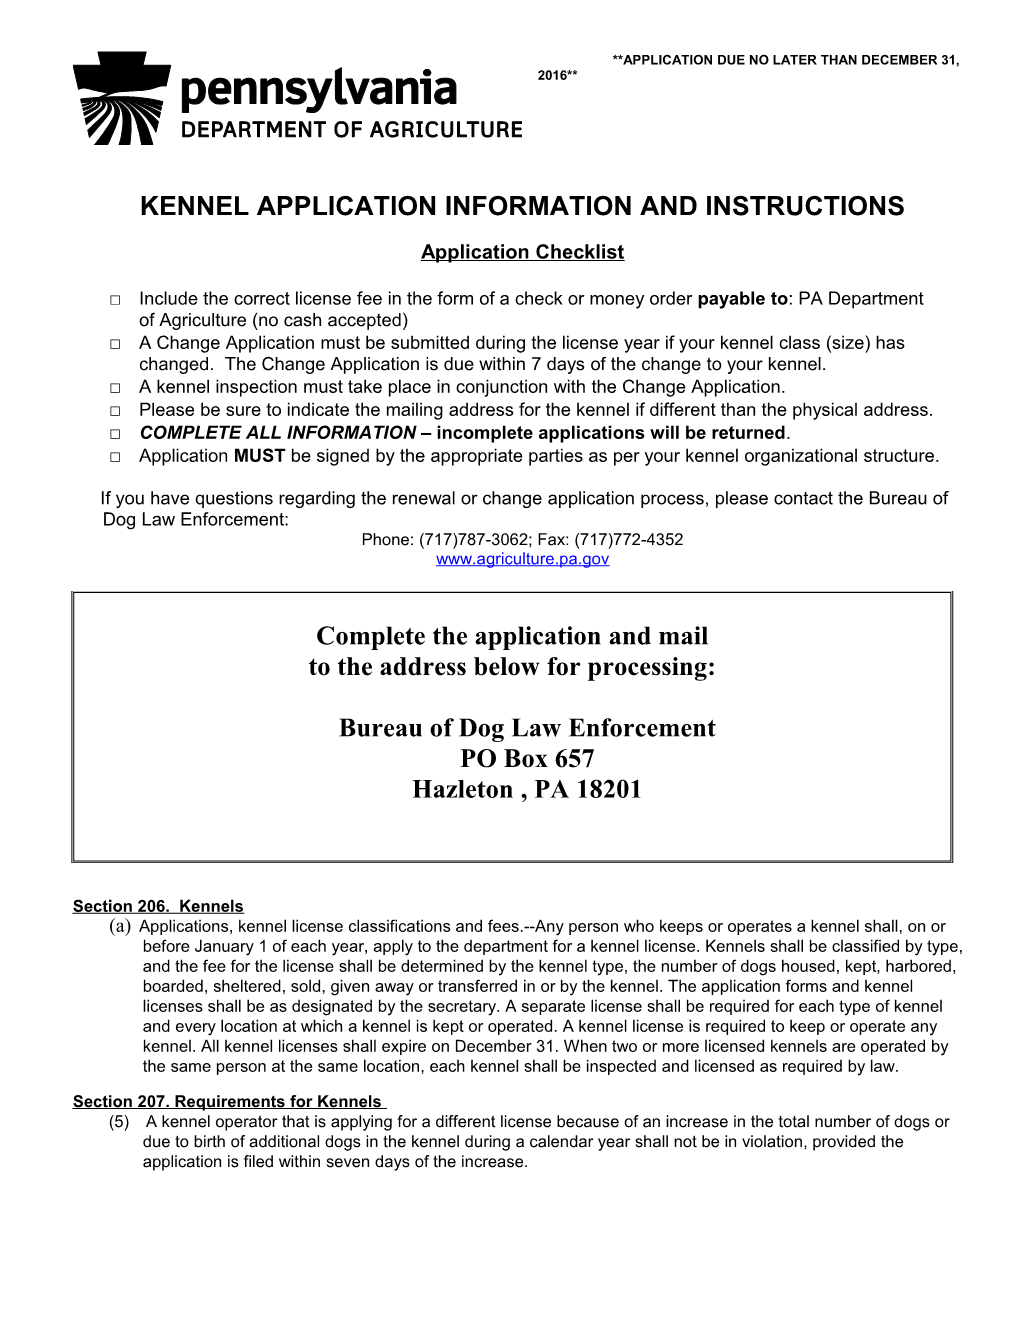 Renewal / Change Application Information and Instructions